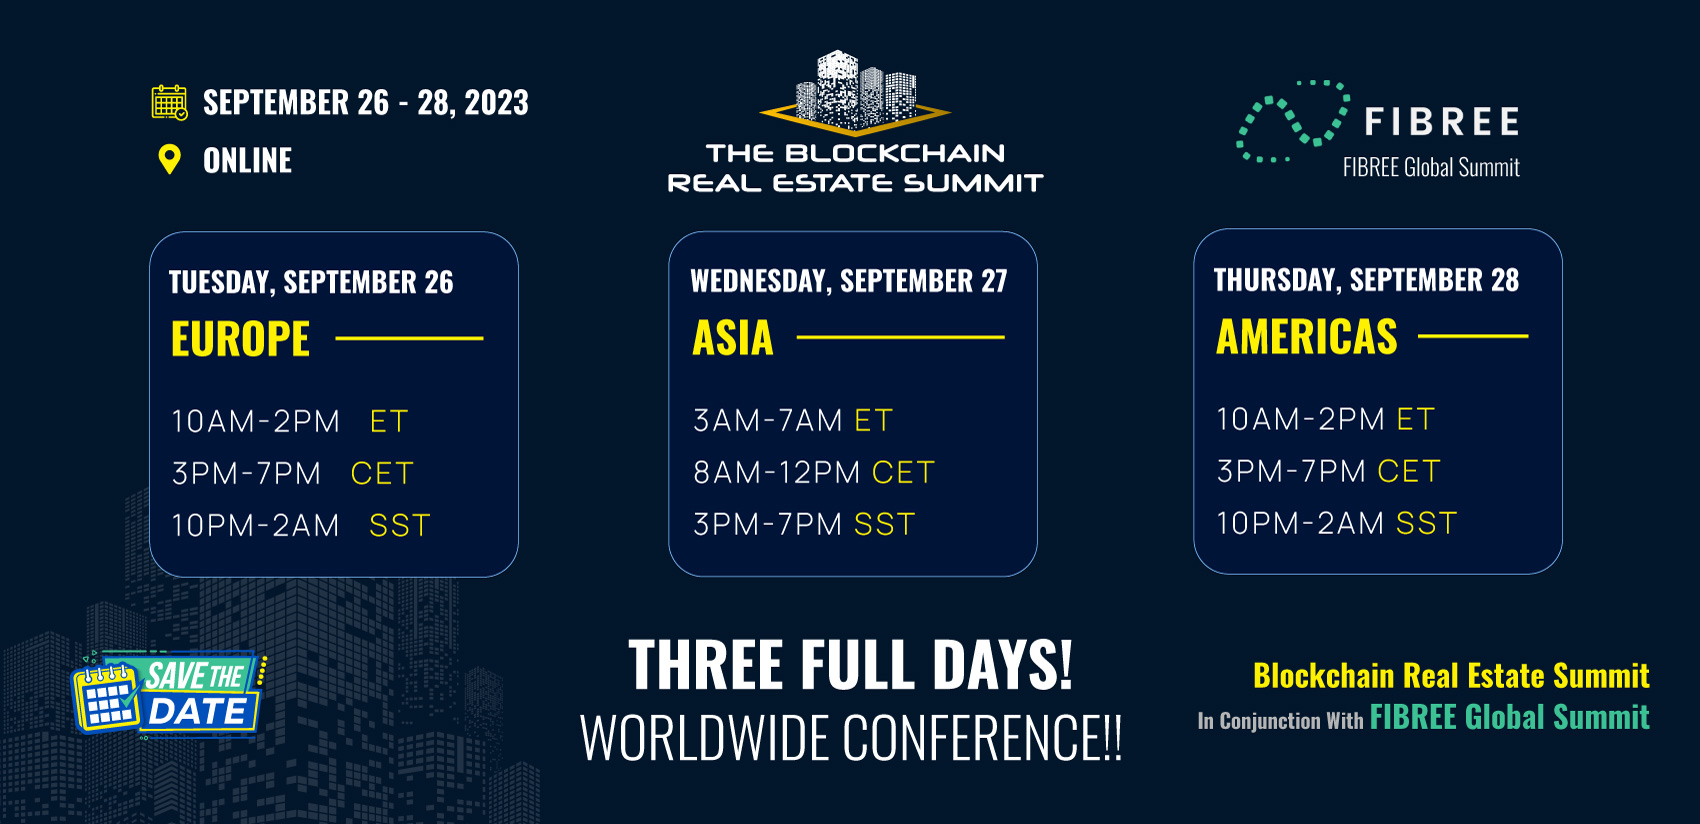 Save the date announcement for Global Blockchain Real Estate Summit 2023 with FIBREE September 26 through 28 online with a chart that displays the times for each day and labels of what time zone the day is made for. Europe focus on Tuesday September 26, 2023: 10 AM-2PM ET / 3PM-7PM CET / 10PM-2AM SST. Asia Focus on Wednesday September 27, 2023: 3 AM-7AM ET / 8AM-12PM CET / 3PM-7PM SST. Americas time zone on Thursday - September 28, 2023: 10 AM-2PM ET / 3PM-7PM CET / 10PM-2AM SST. THREE FULL DAYS! WORLDWIDE BLOCKCHAIN CONFERENCE!